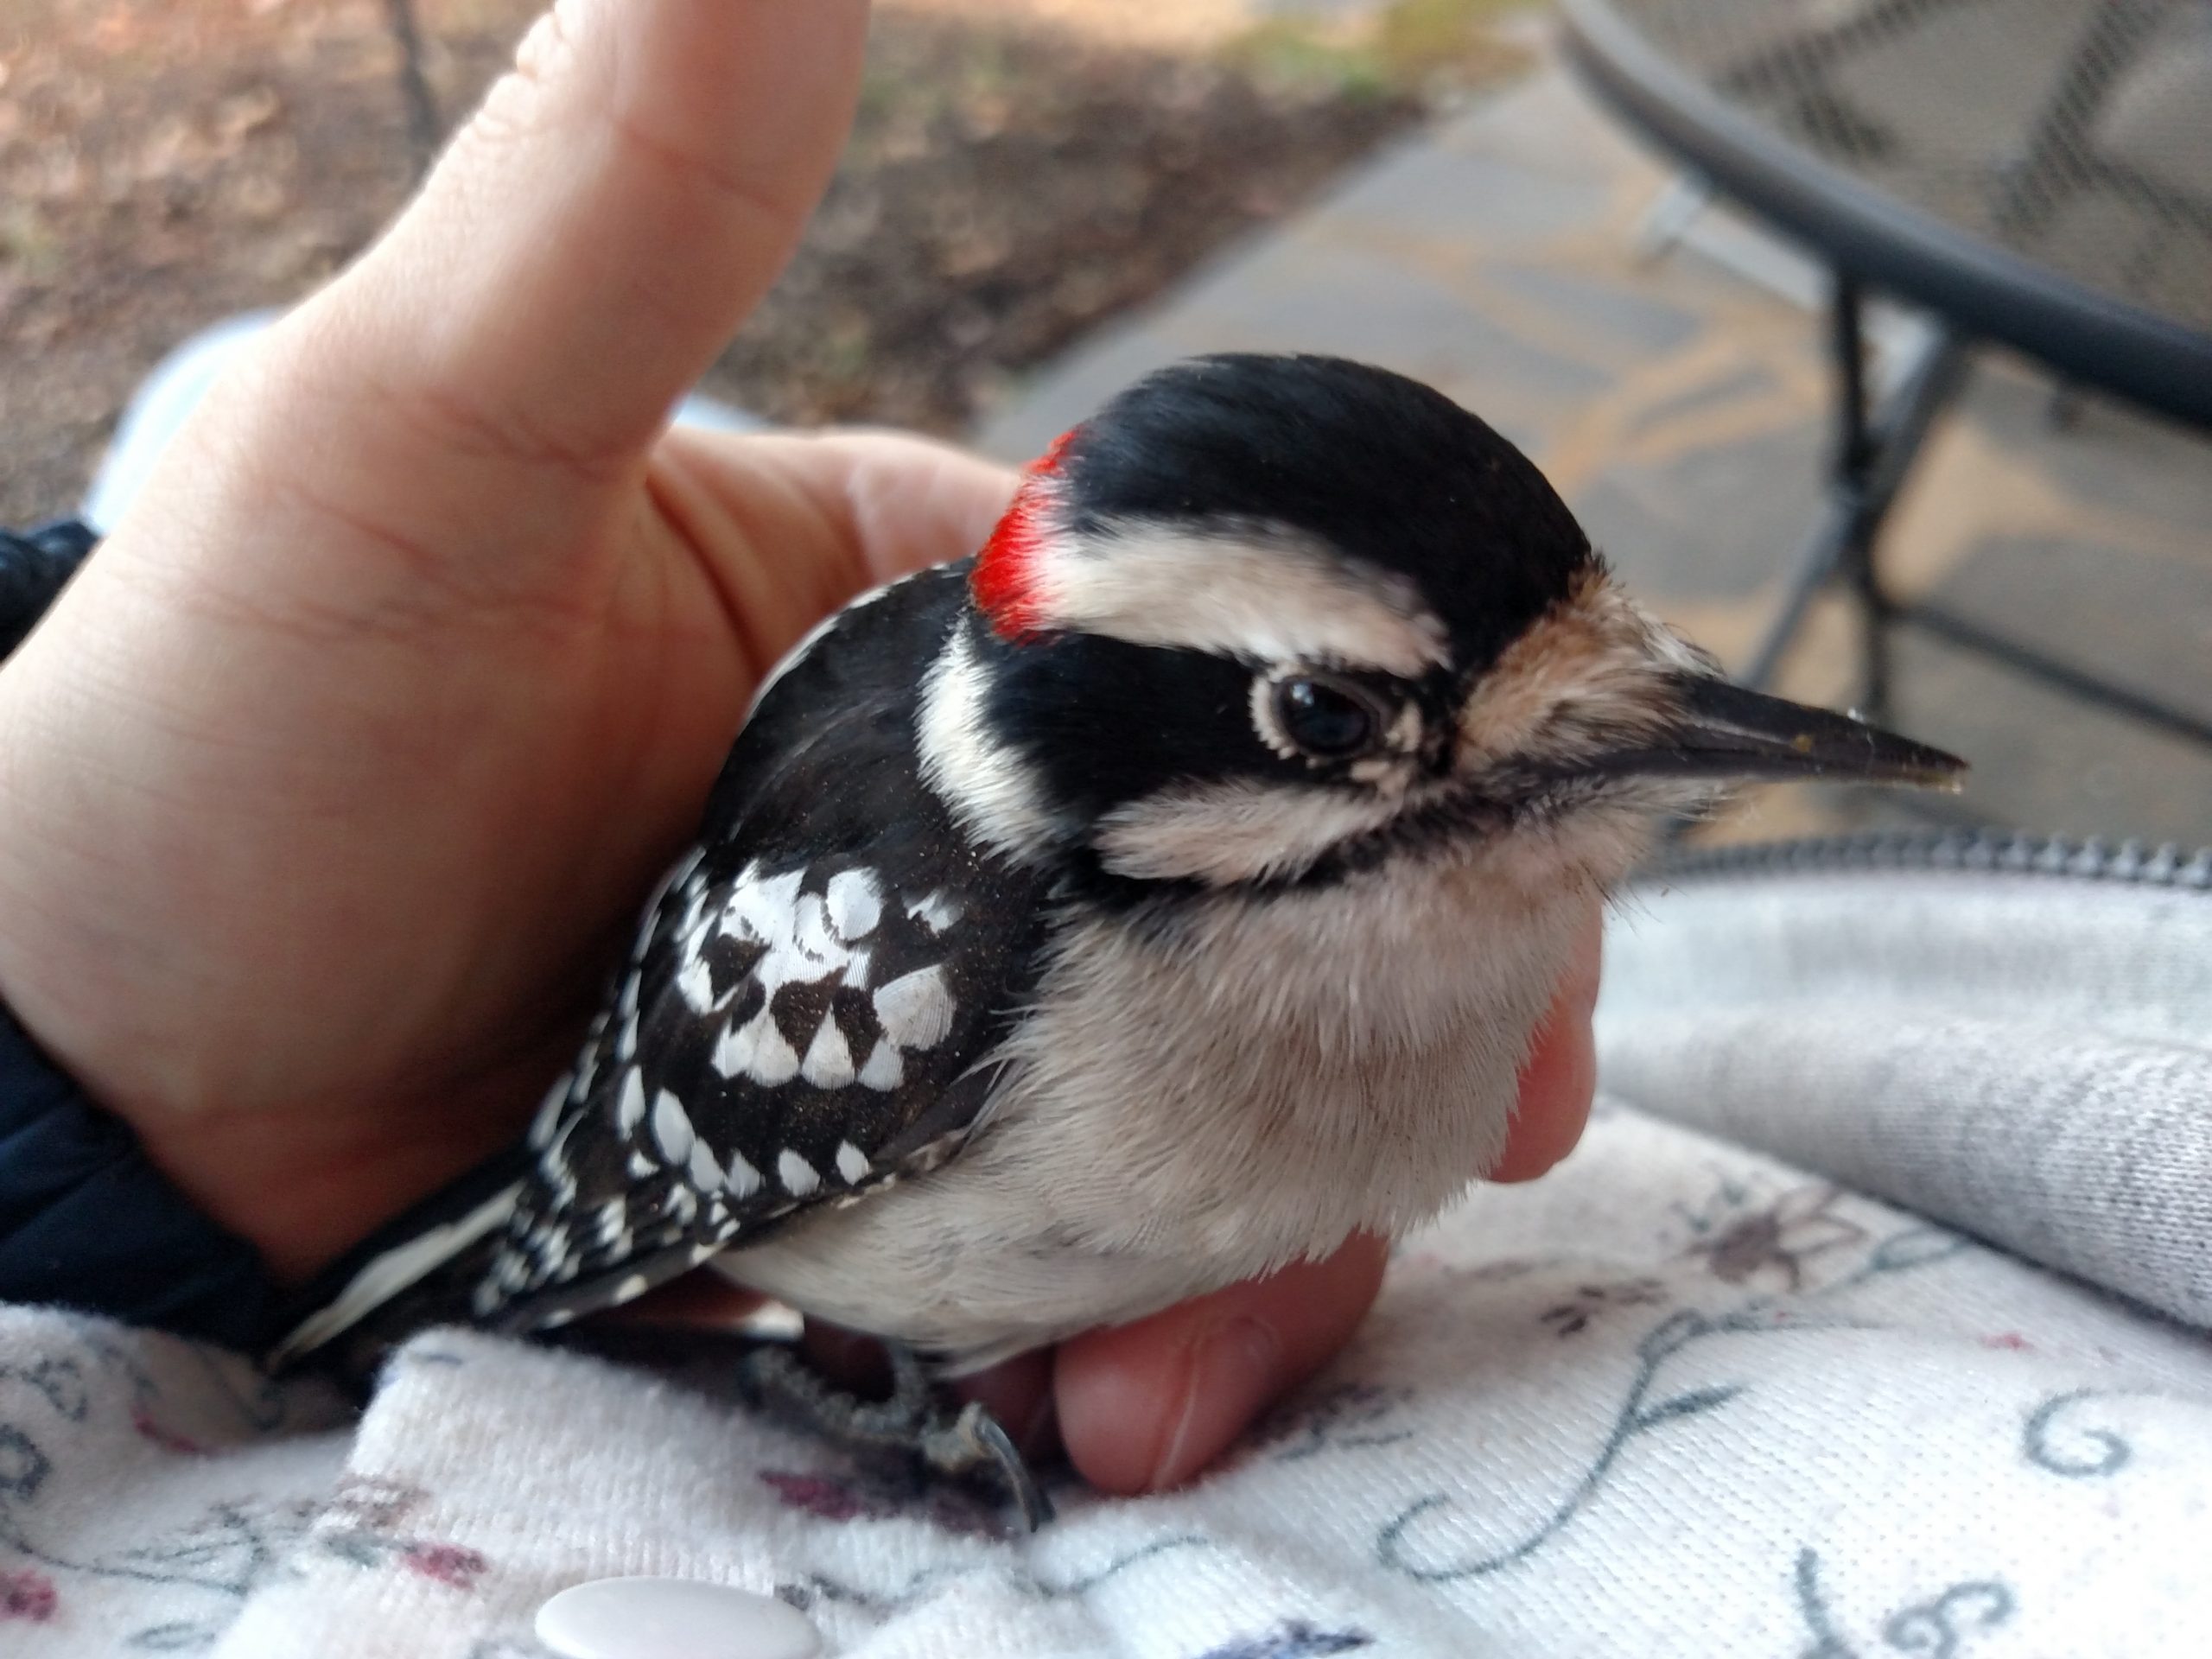 A Visit from Mr. Downy Woodpecker